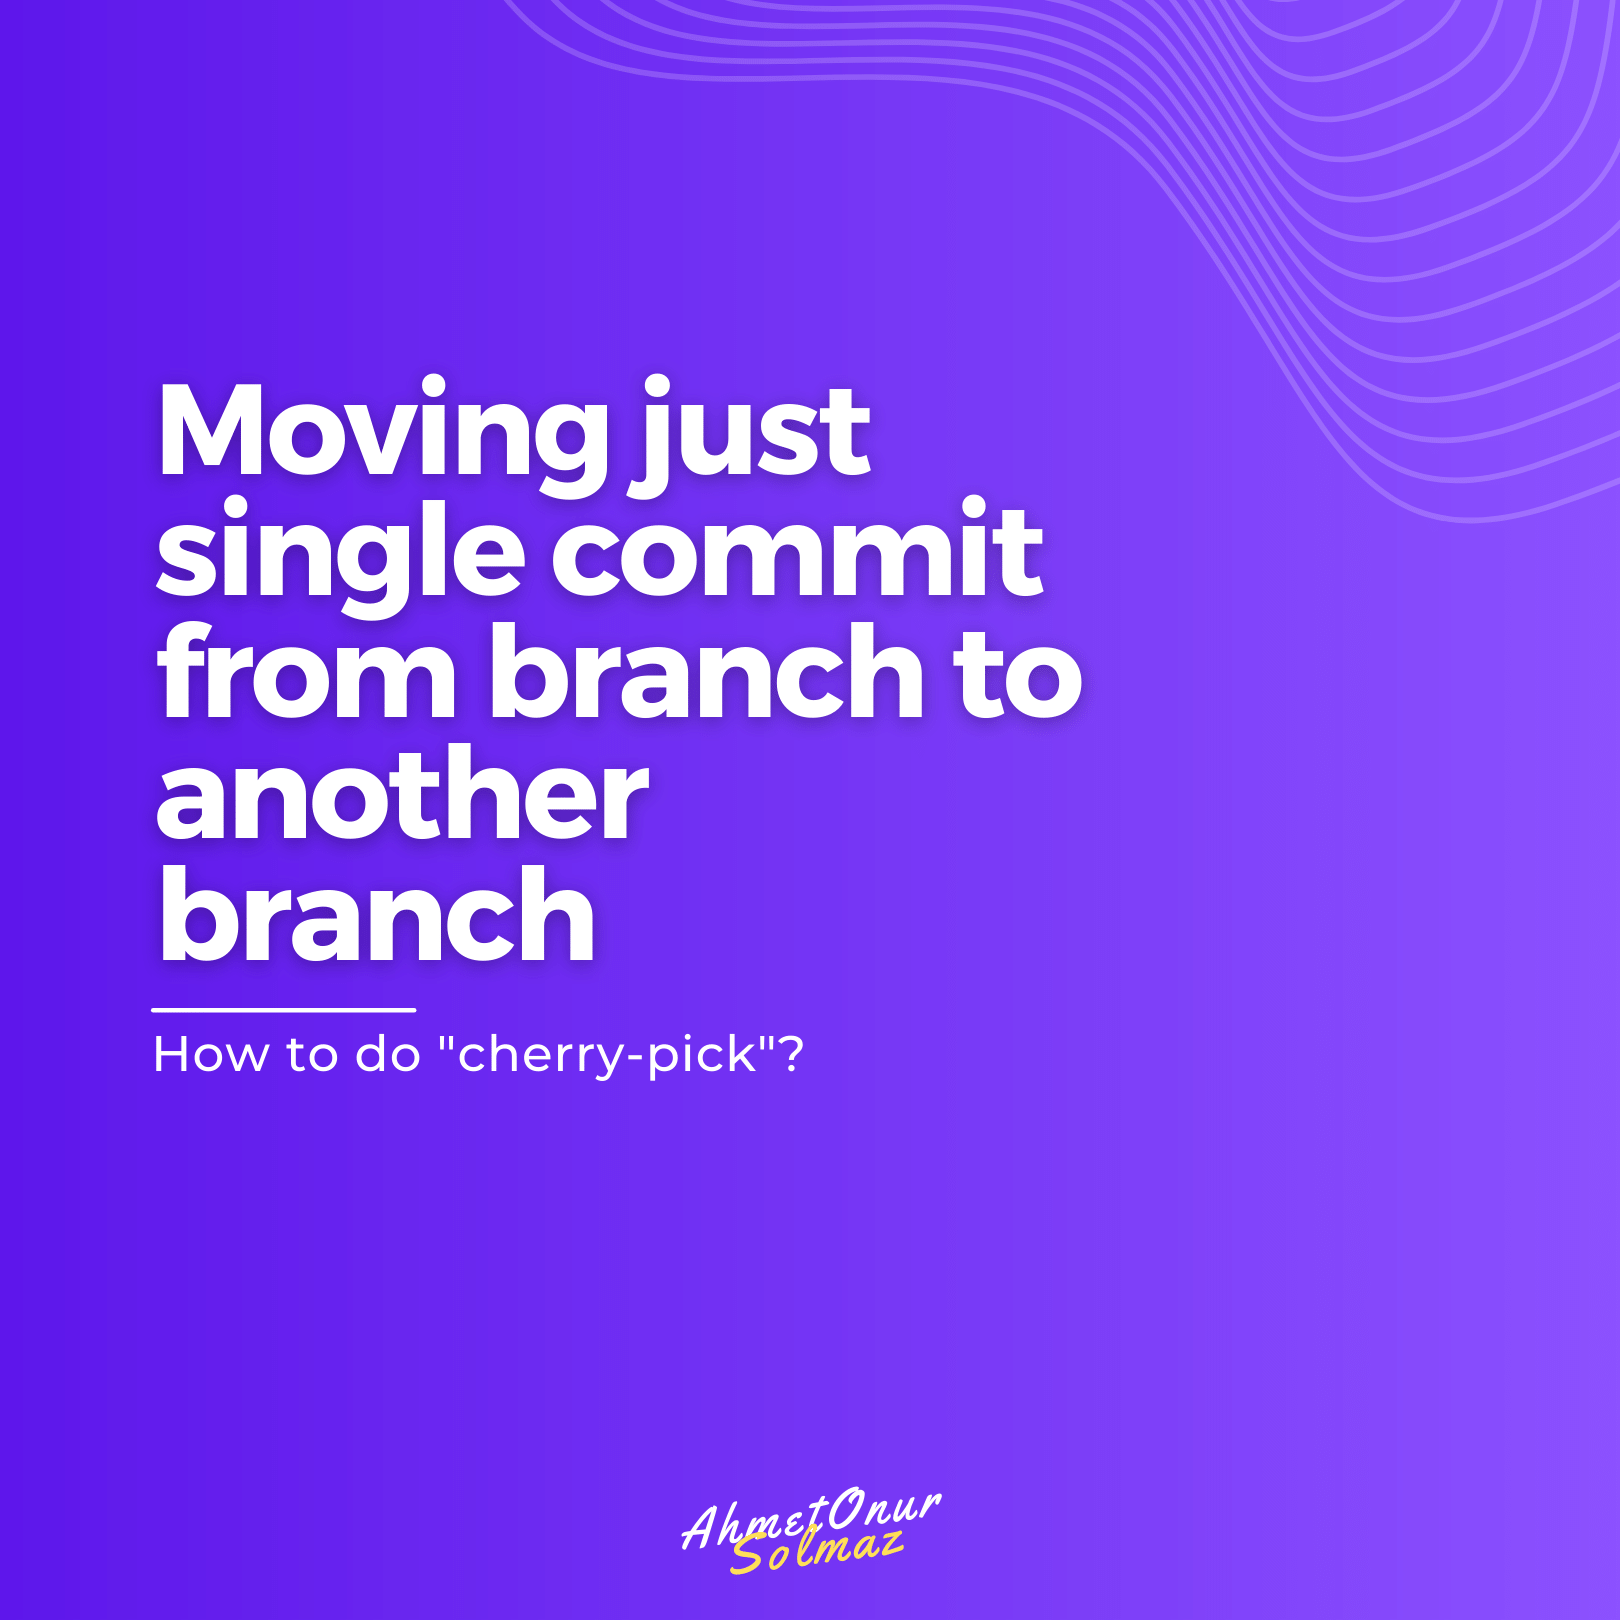 Moving just single commit from branch to another branch